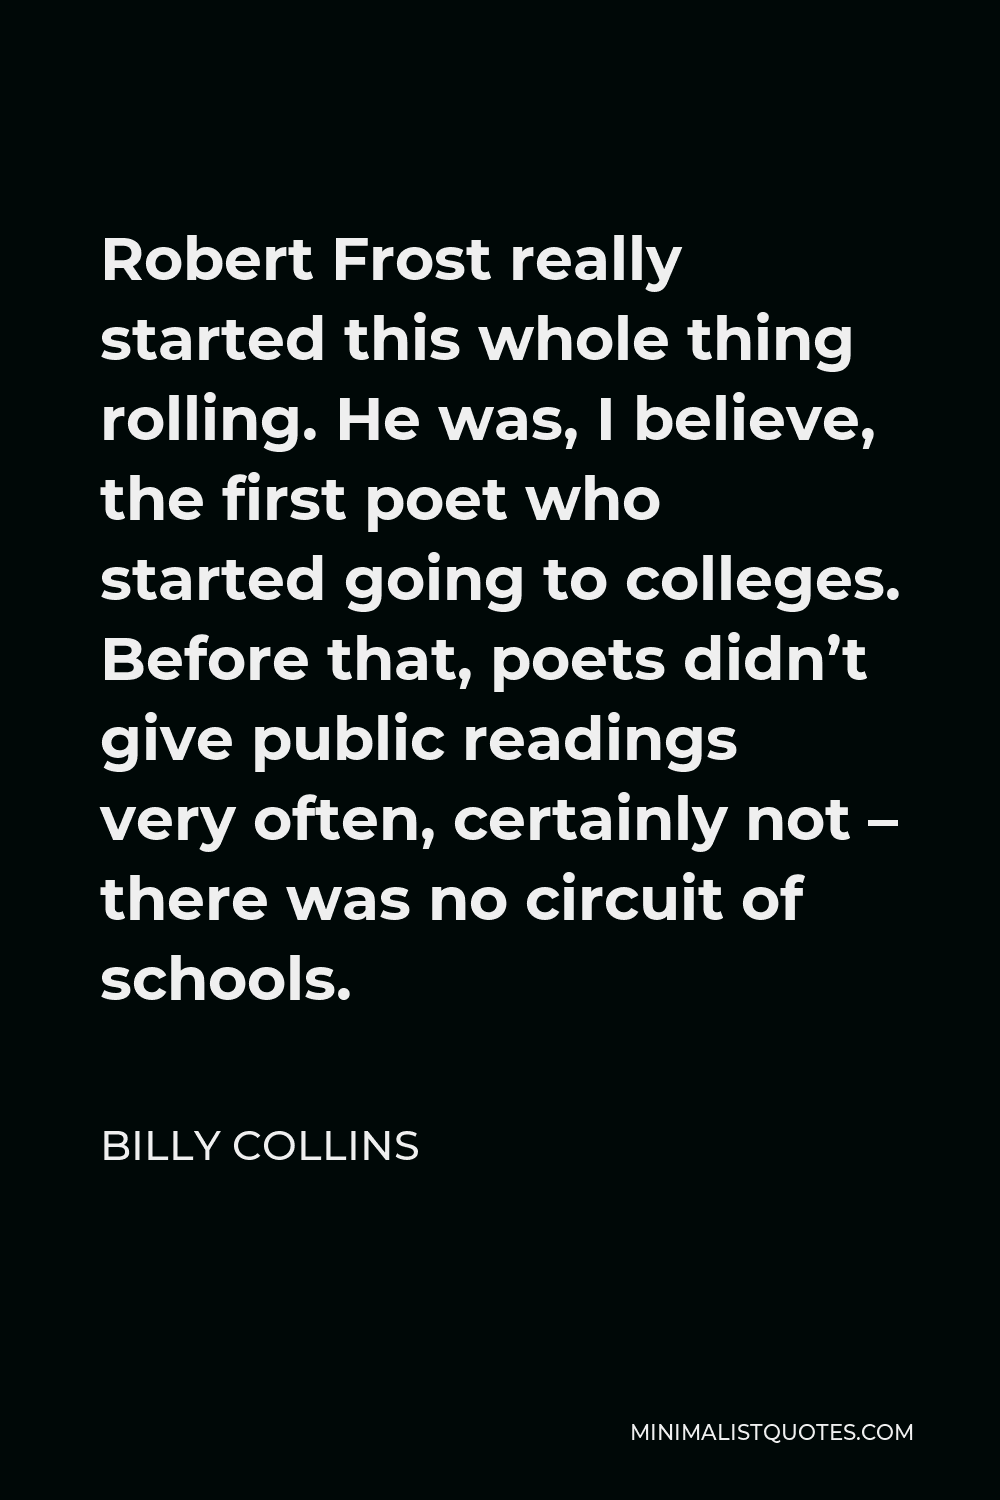 Billy Collins Quote - Robert Frost really started this whole thing rolling. He was, I believe, the first poet who started going to colleges. Before that, poets didn’t give public readings very often, certainly not – there was no circuit of schools.